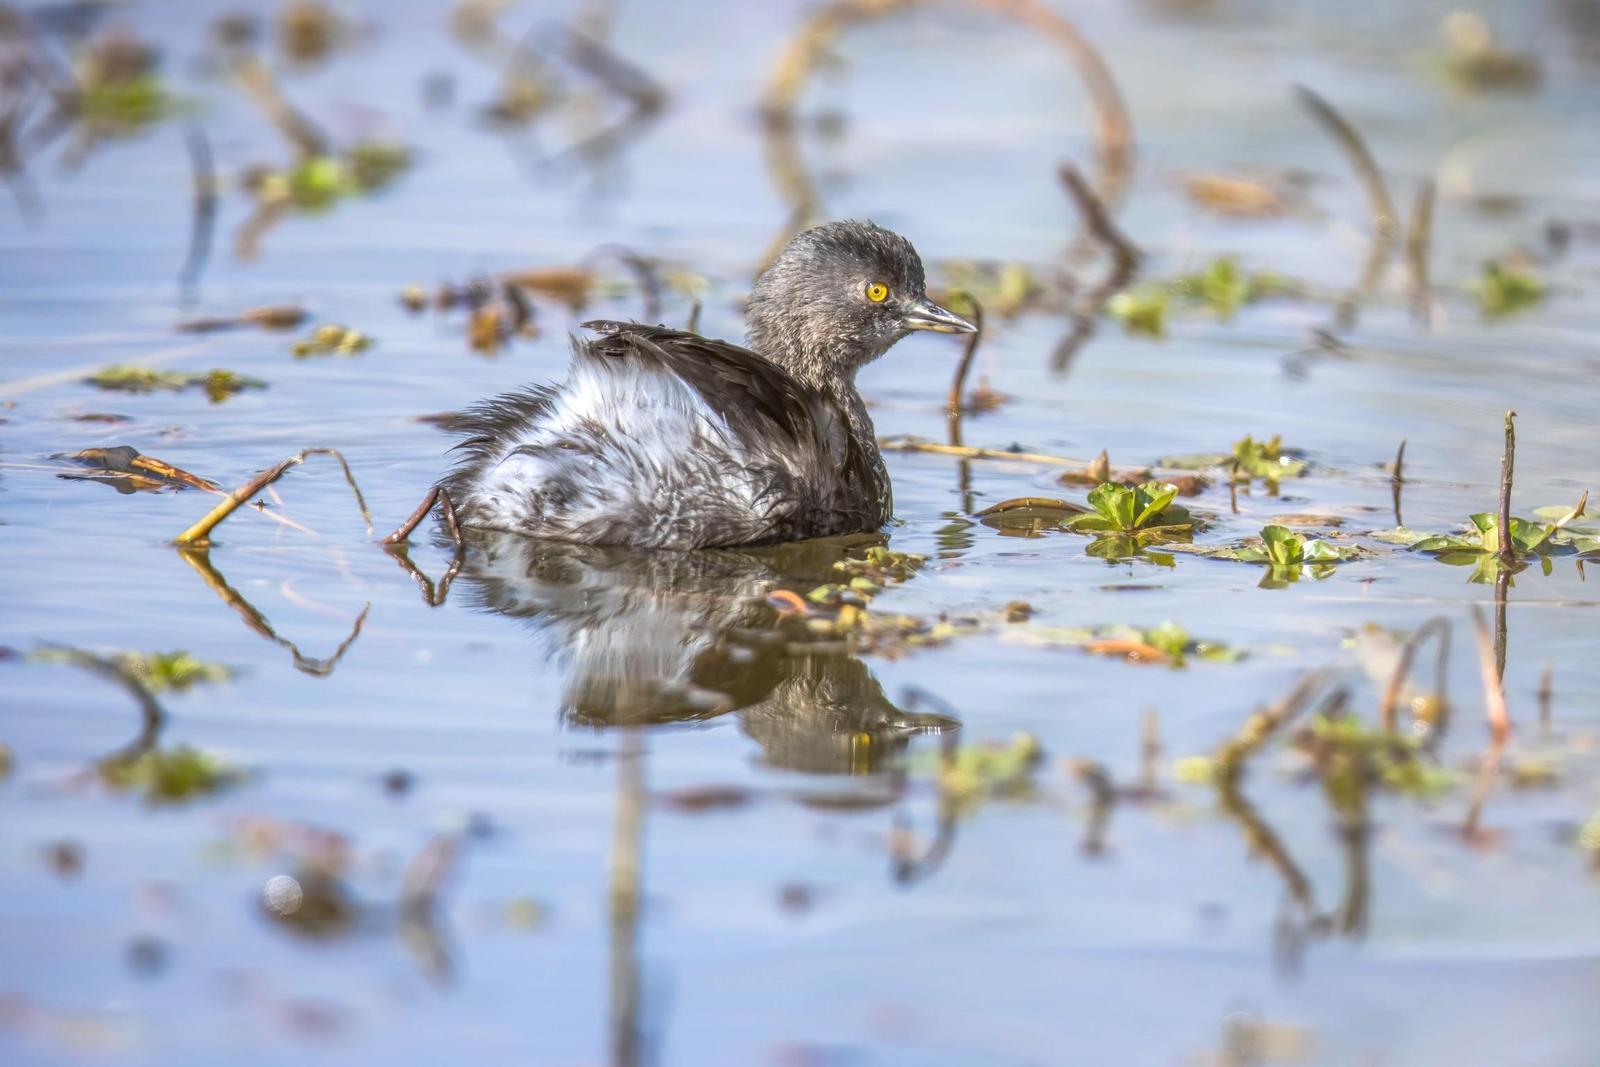 Least Grebe Photo by Tom Ford-Hutchinson